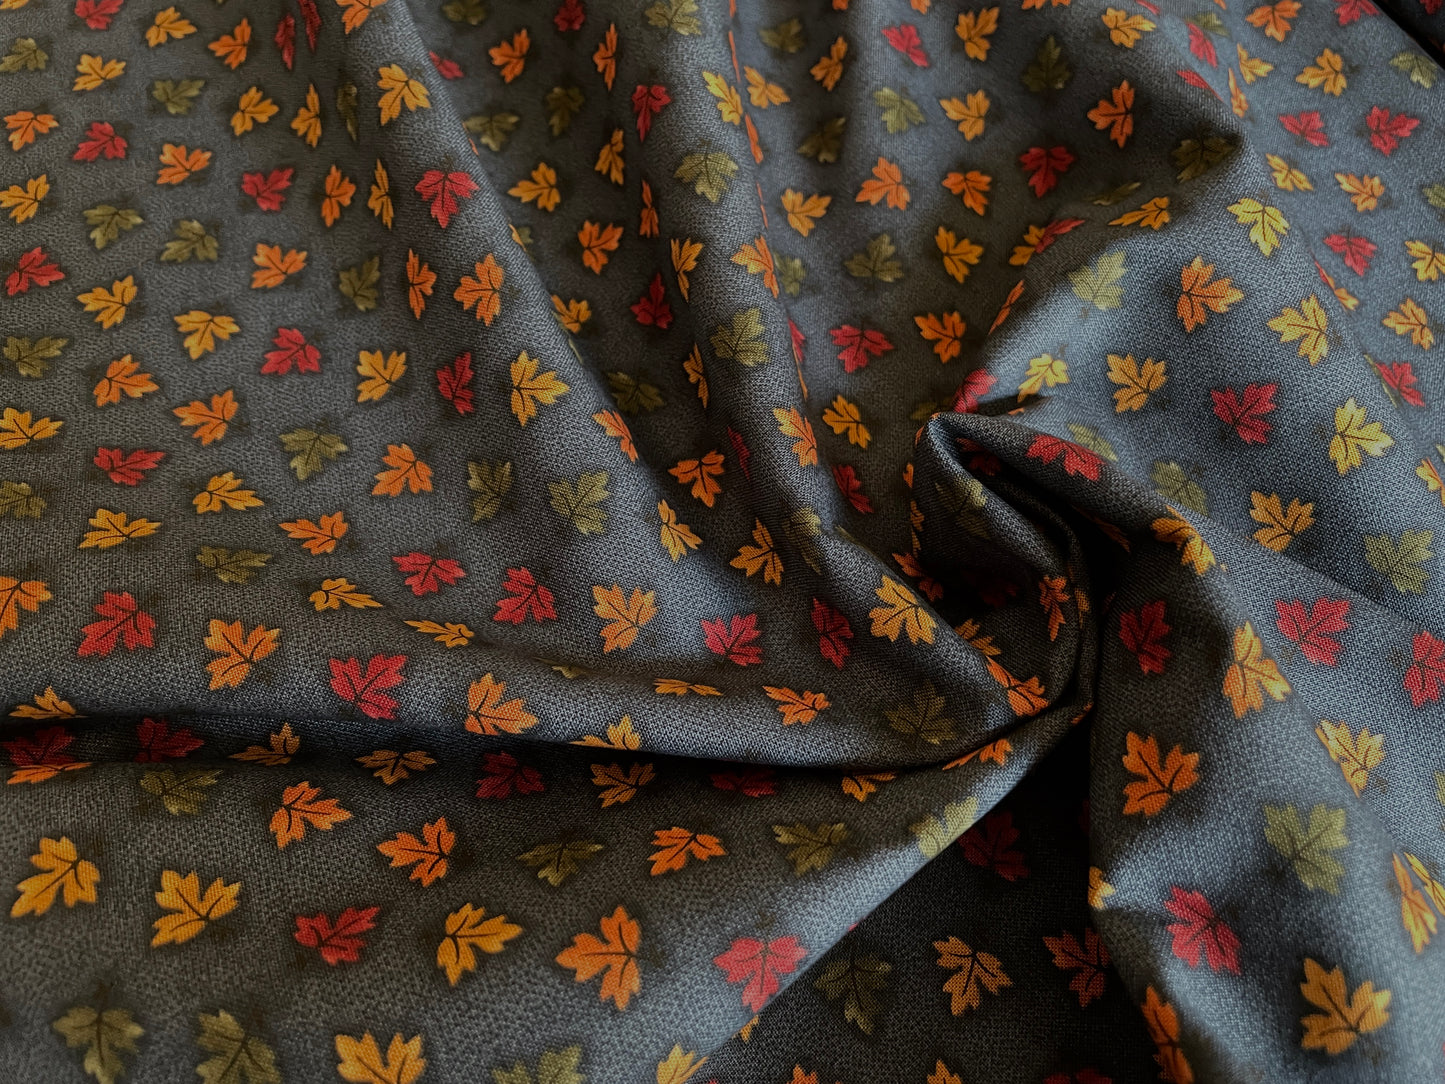 100% Cotton - Quilting Weight - Tiny Autumn Leaves on Deep Blue